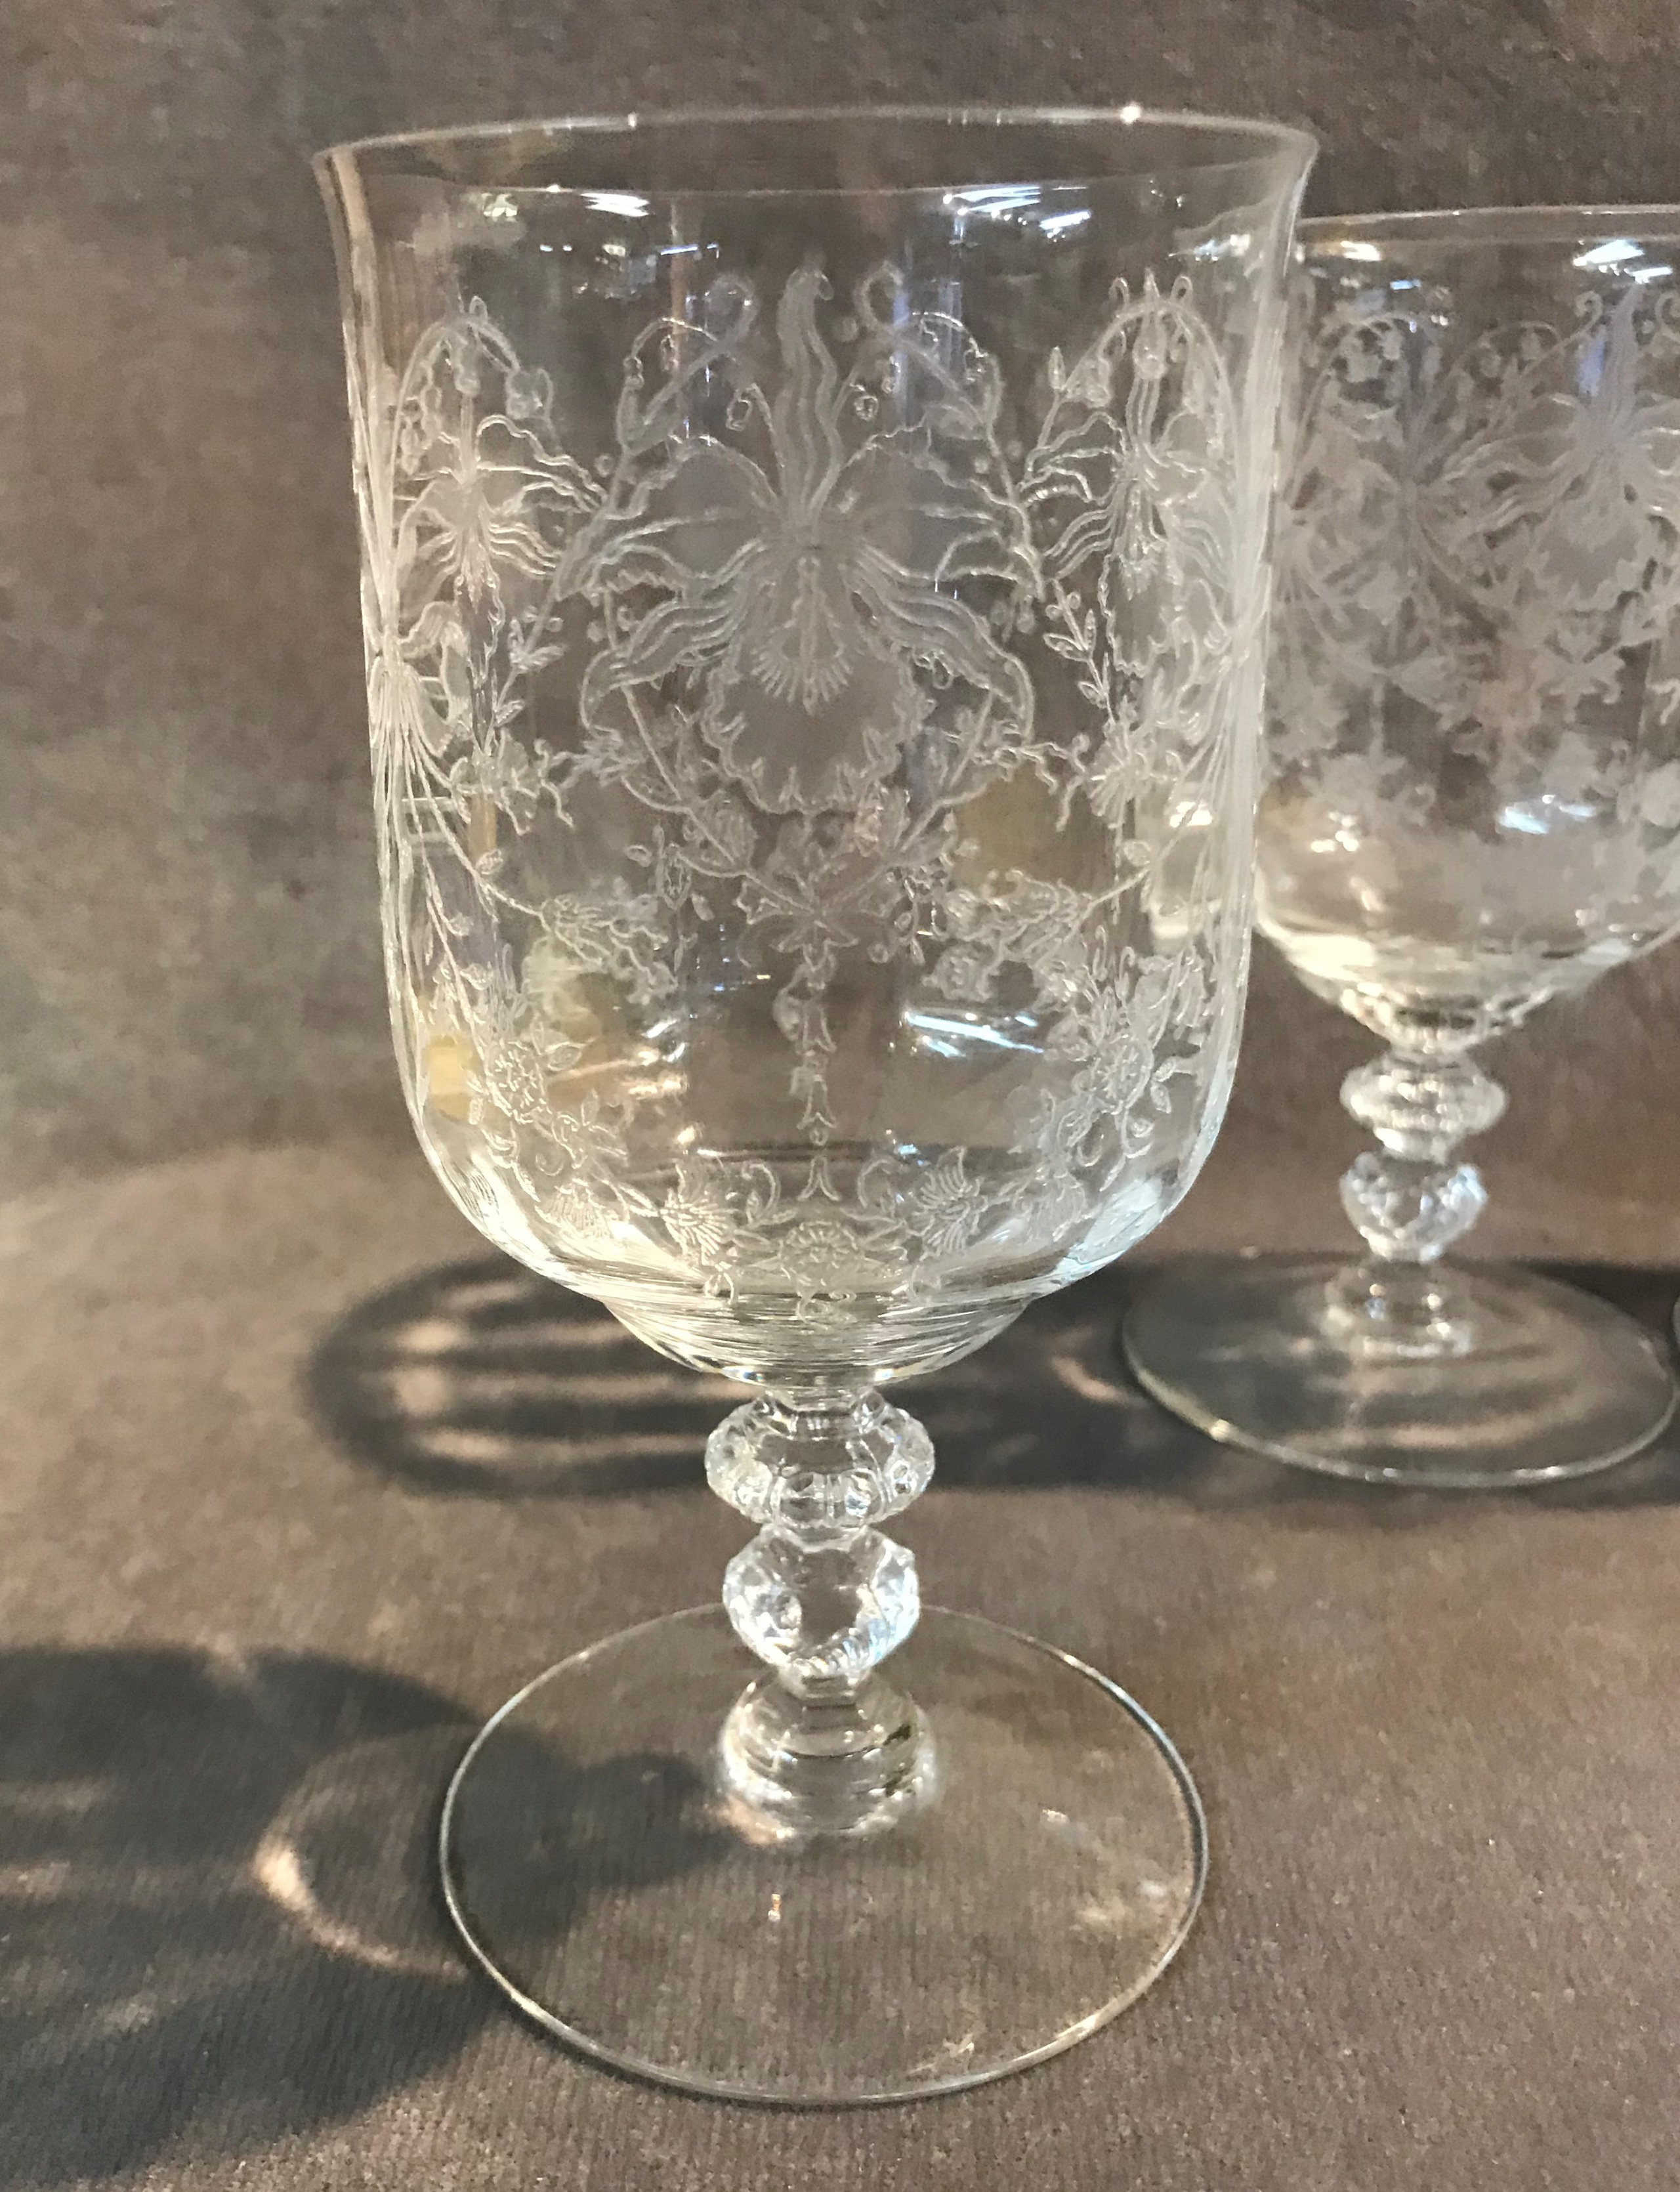 Vintage Etched Glass Wine Glasses/water Goblets Modern Stylized